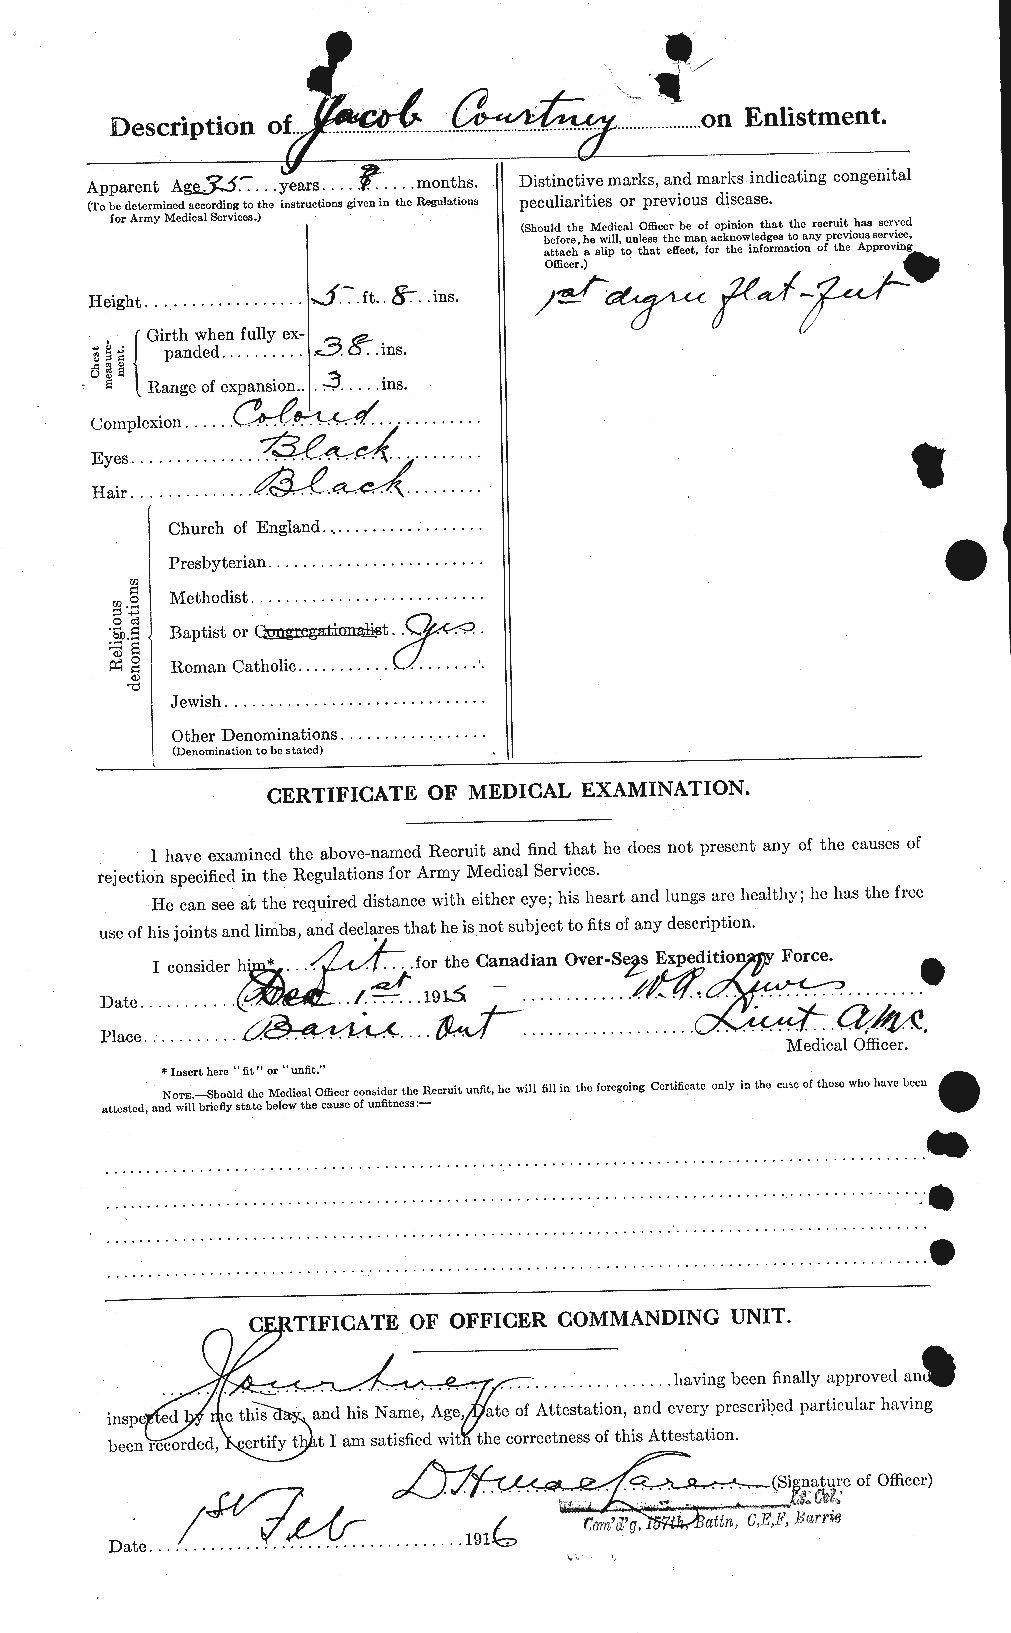 Personnel Records of the First World War - CEF 059126b